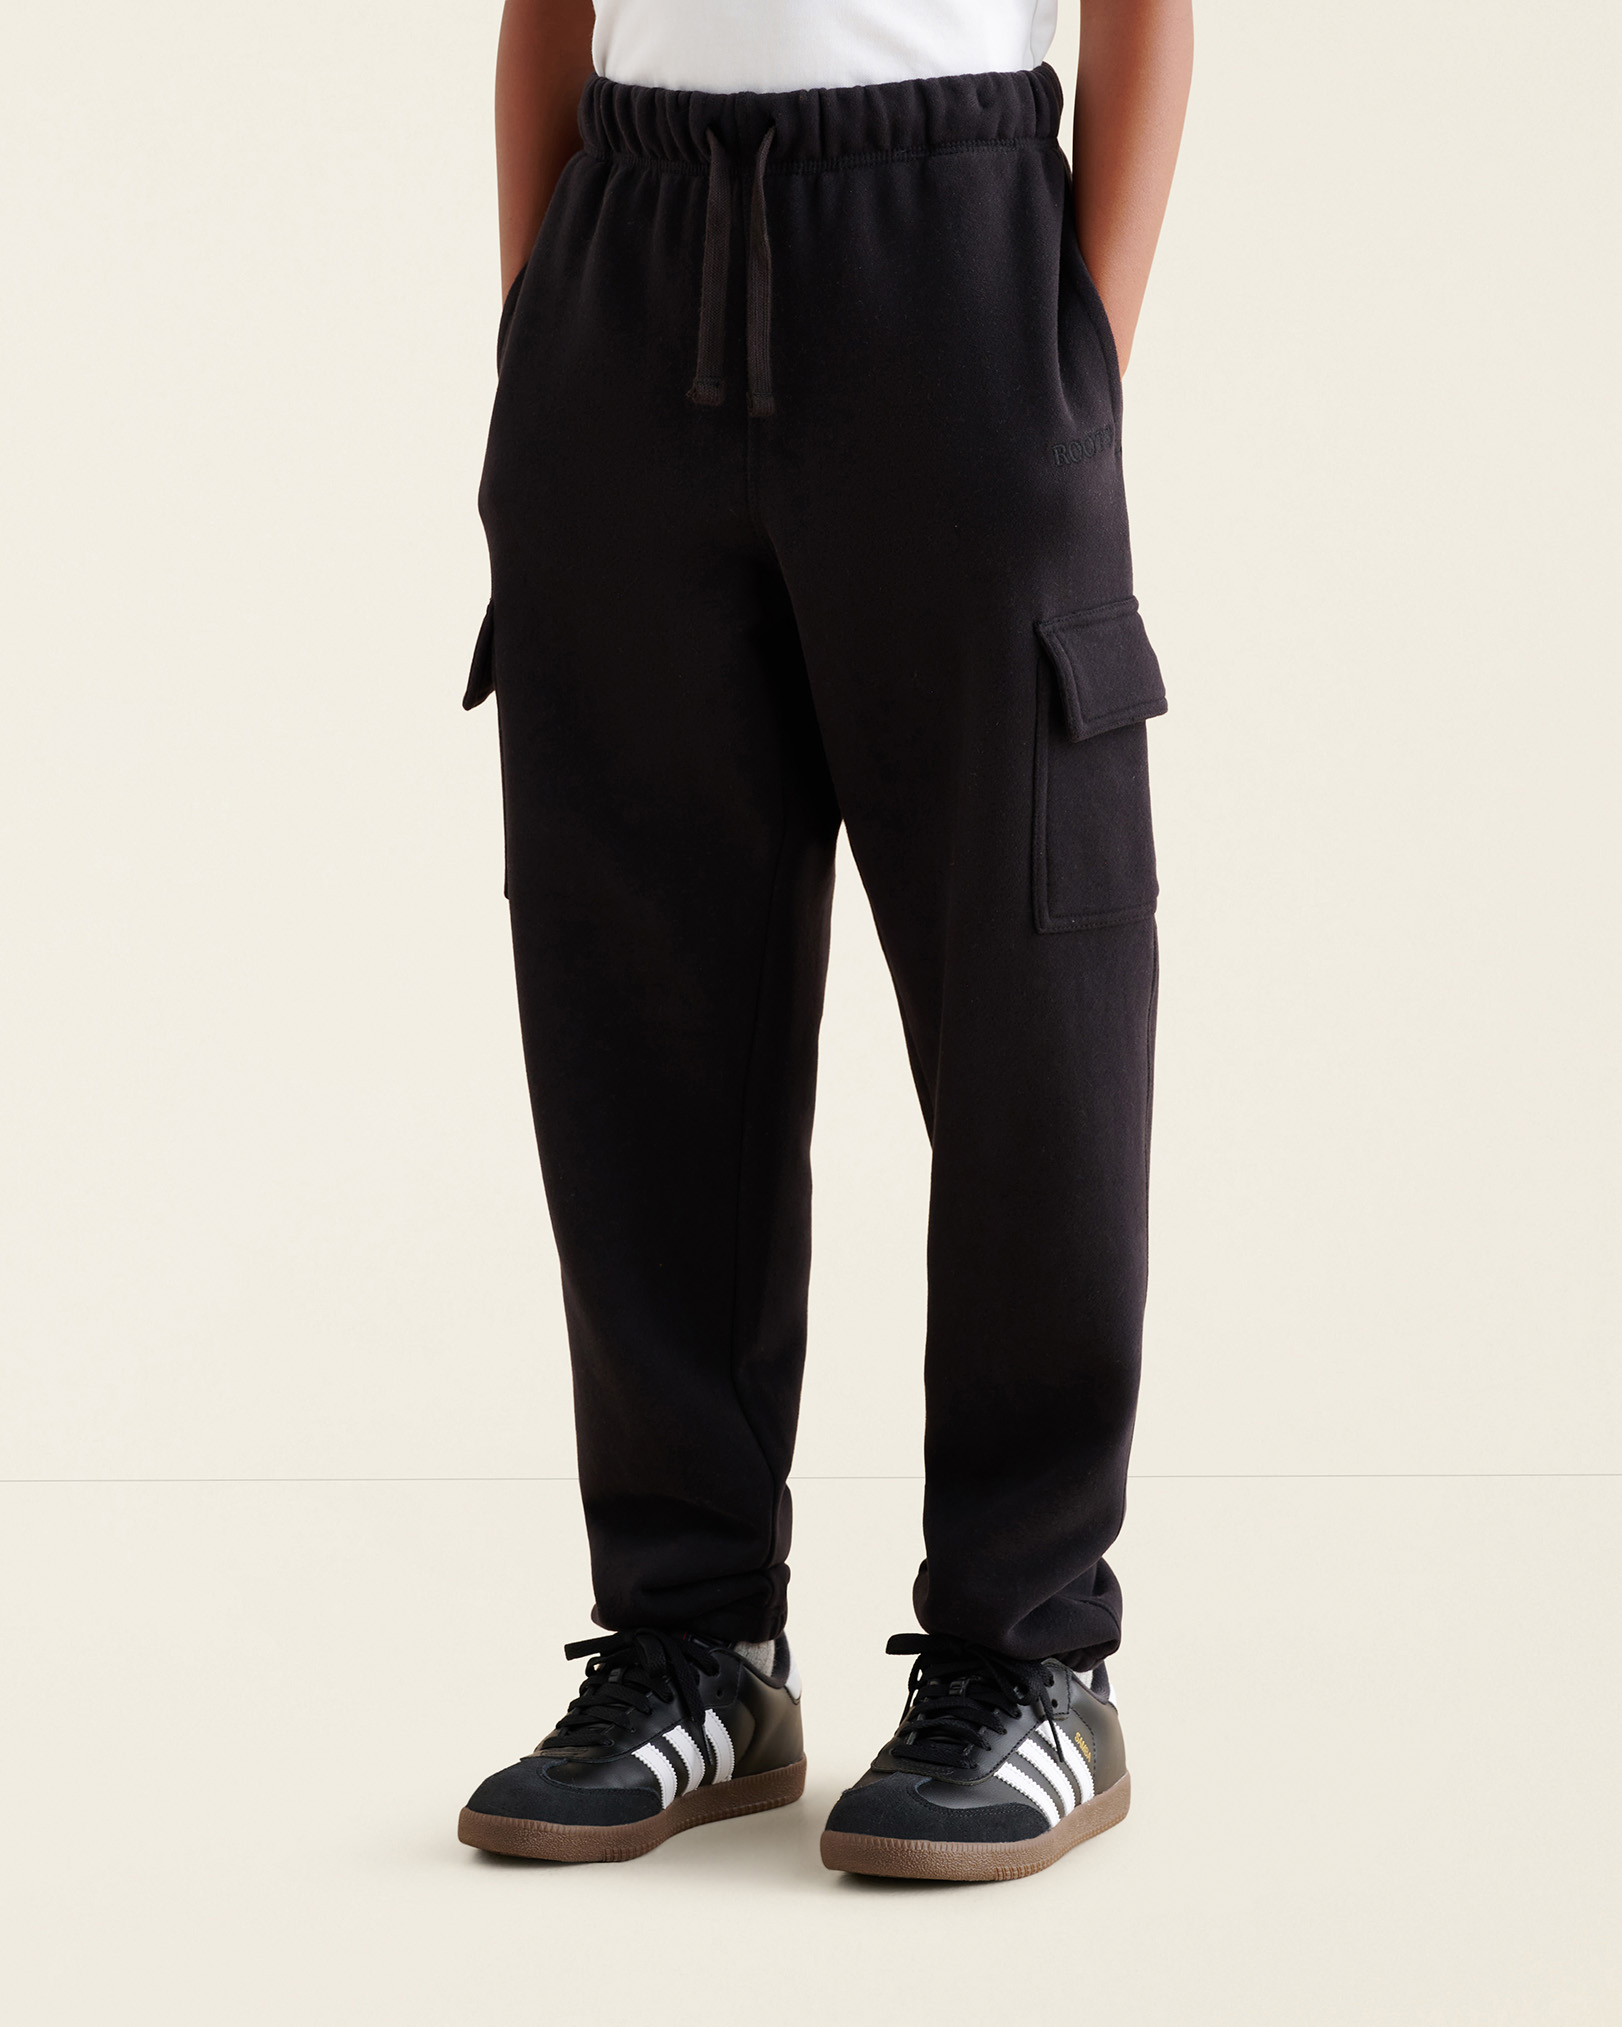 Roots Kids One Cargo Sweatpant in Black